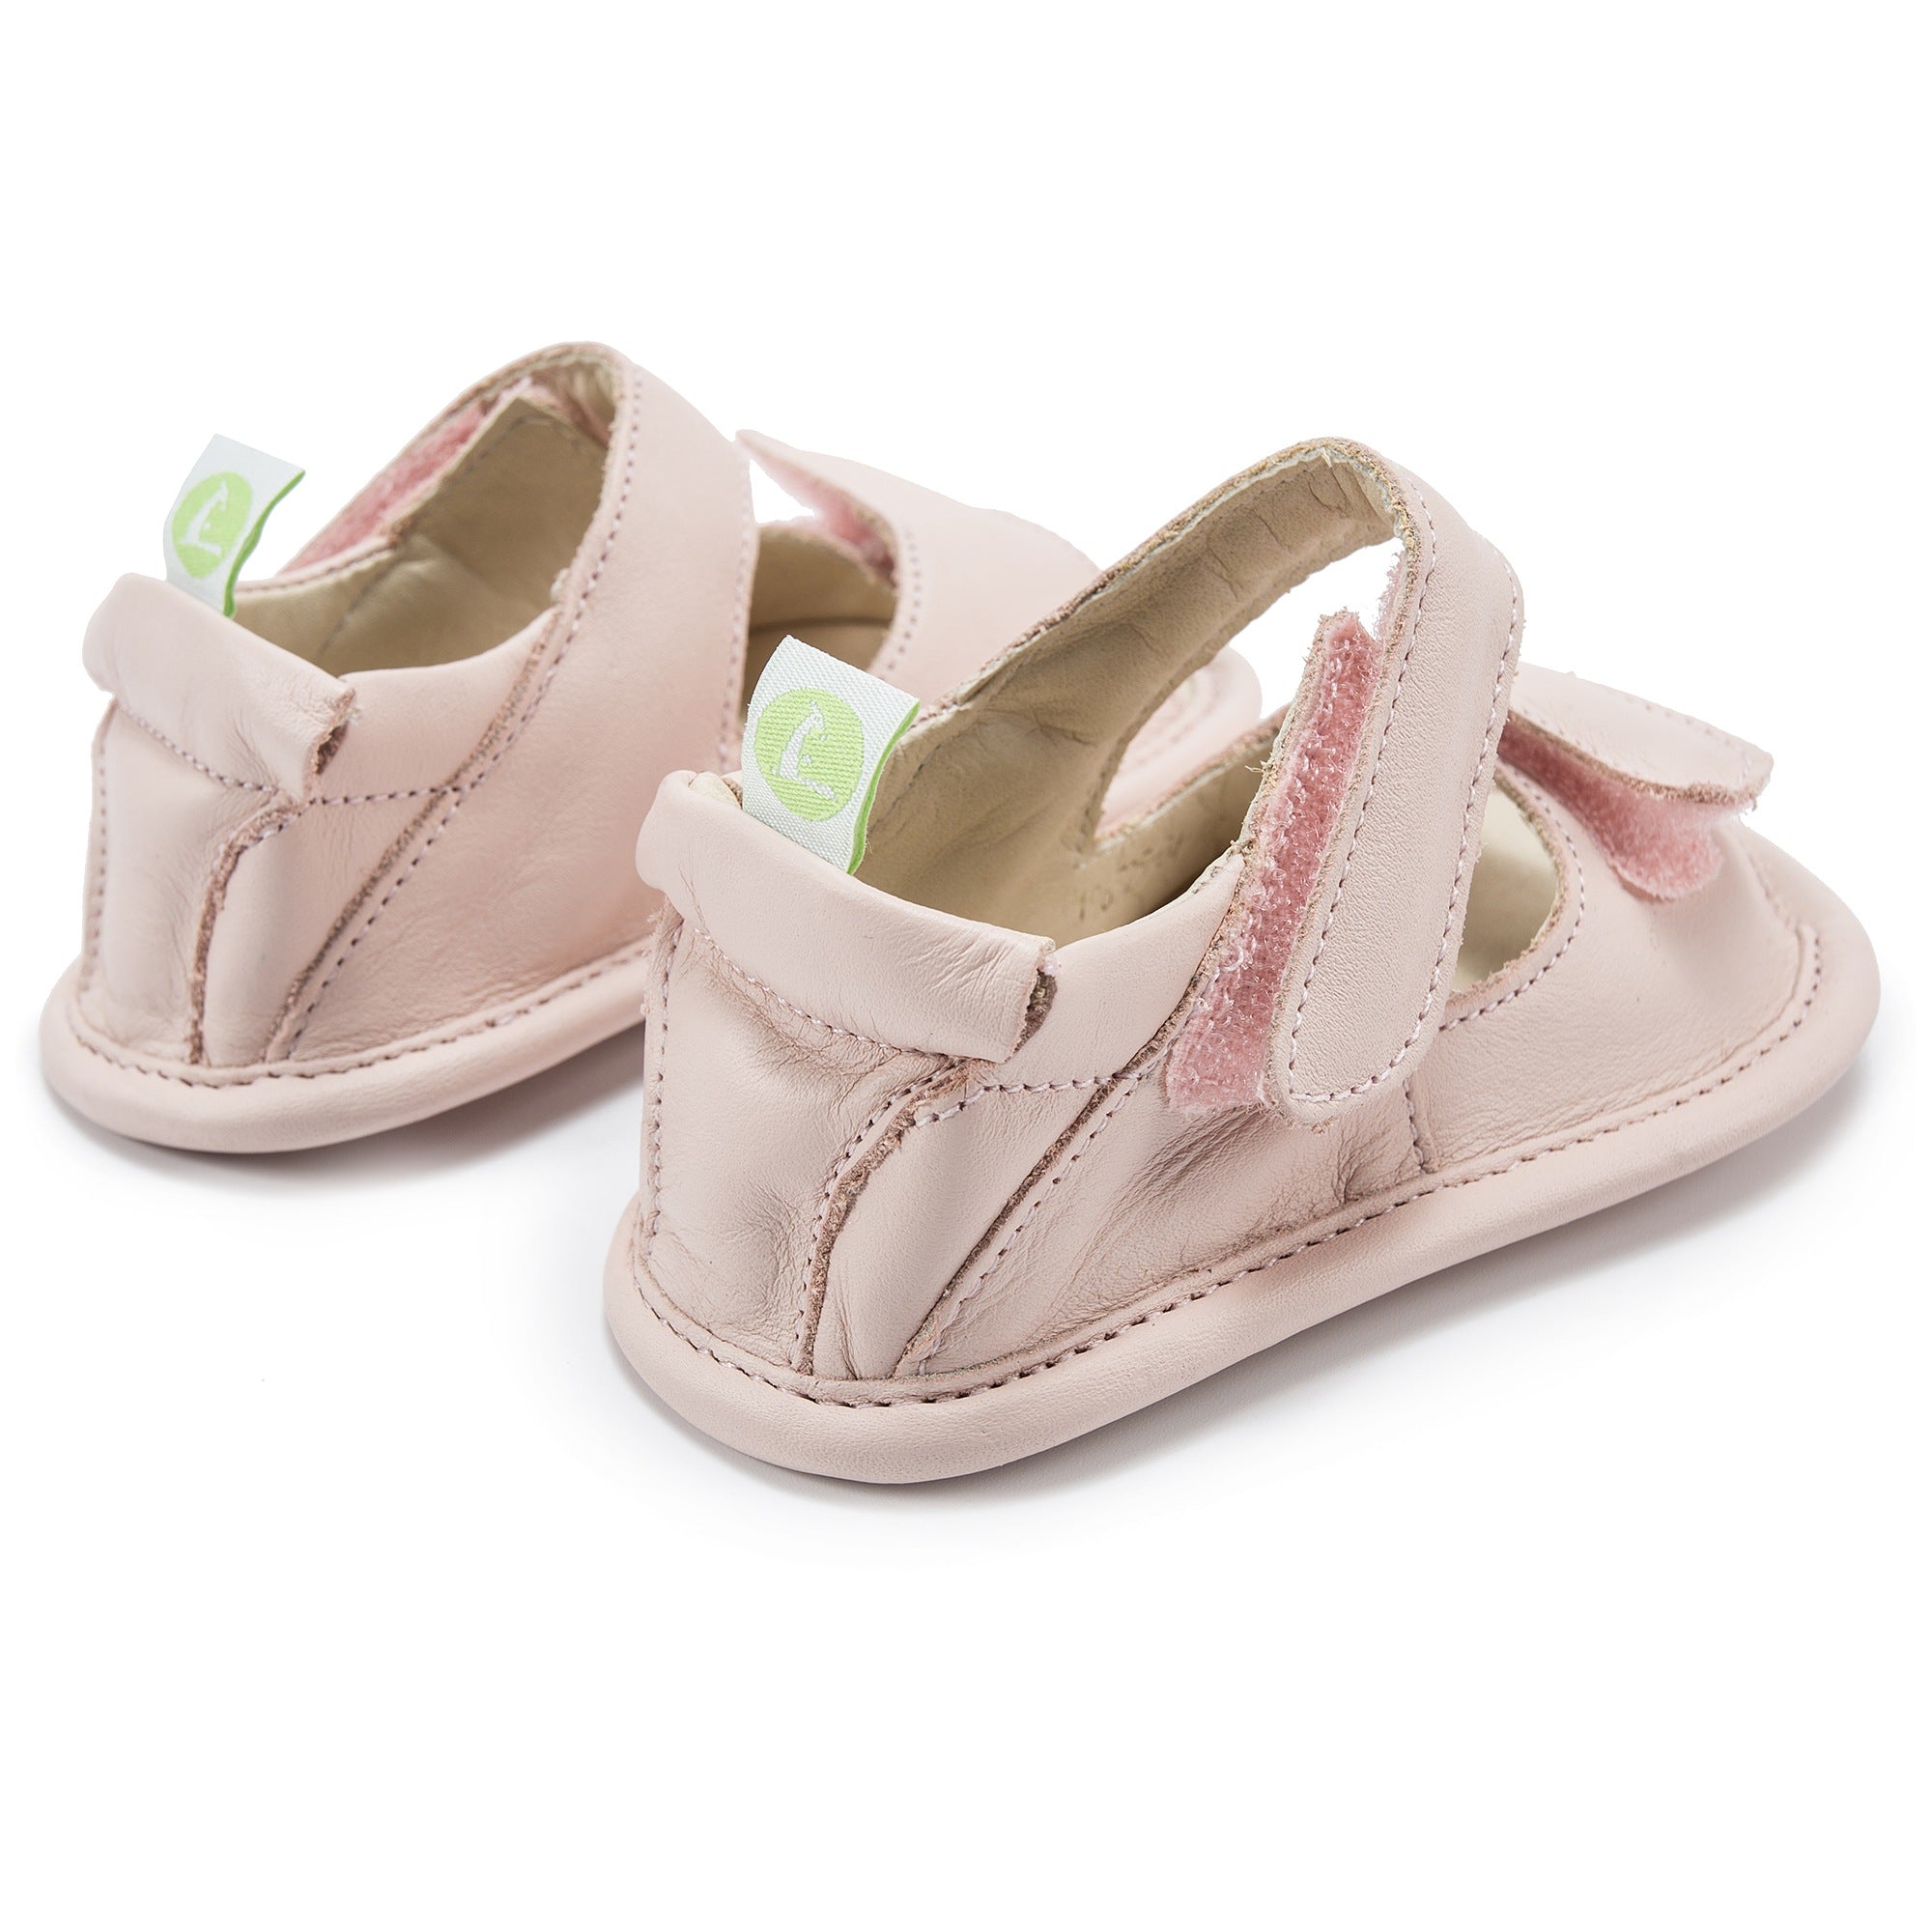 Baby Girls Cotton Candy Leather Sandal